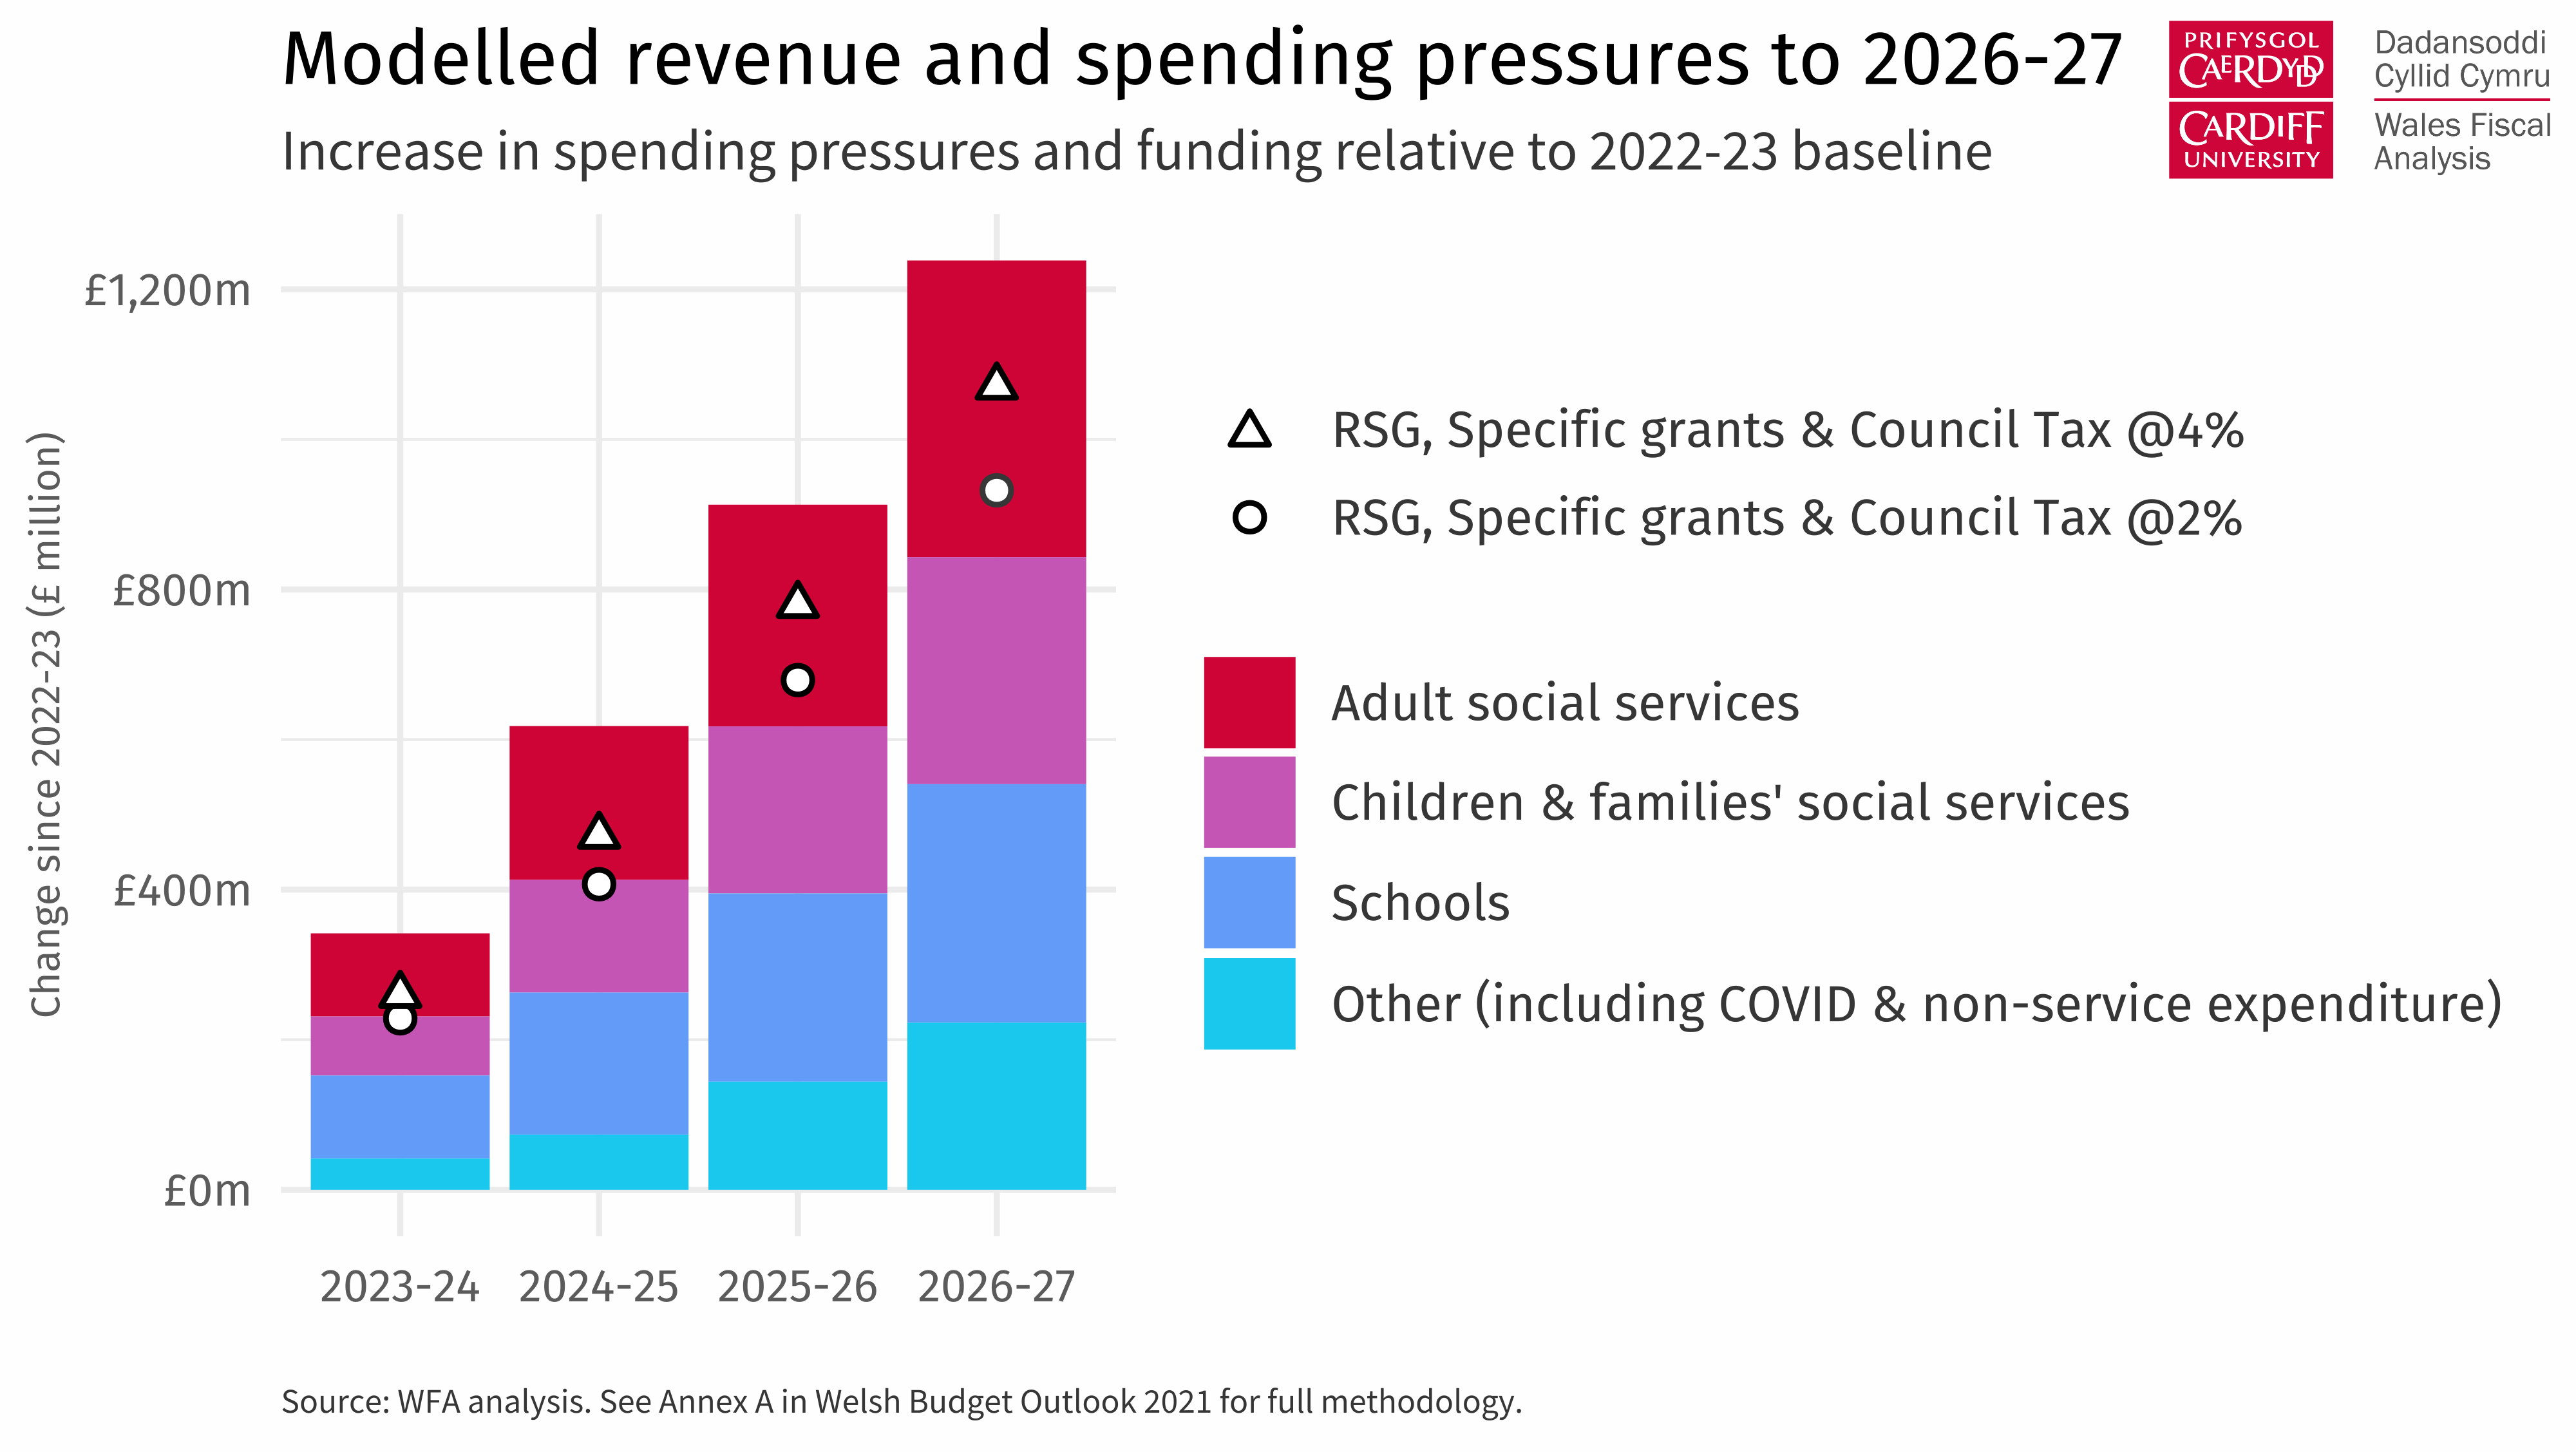 Bar chart showing councils' projected revenue and modelled spending pressures from 2023-24 to 2026-27.